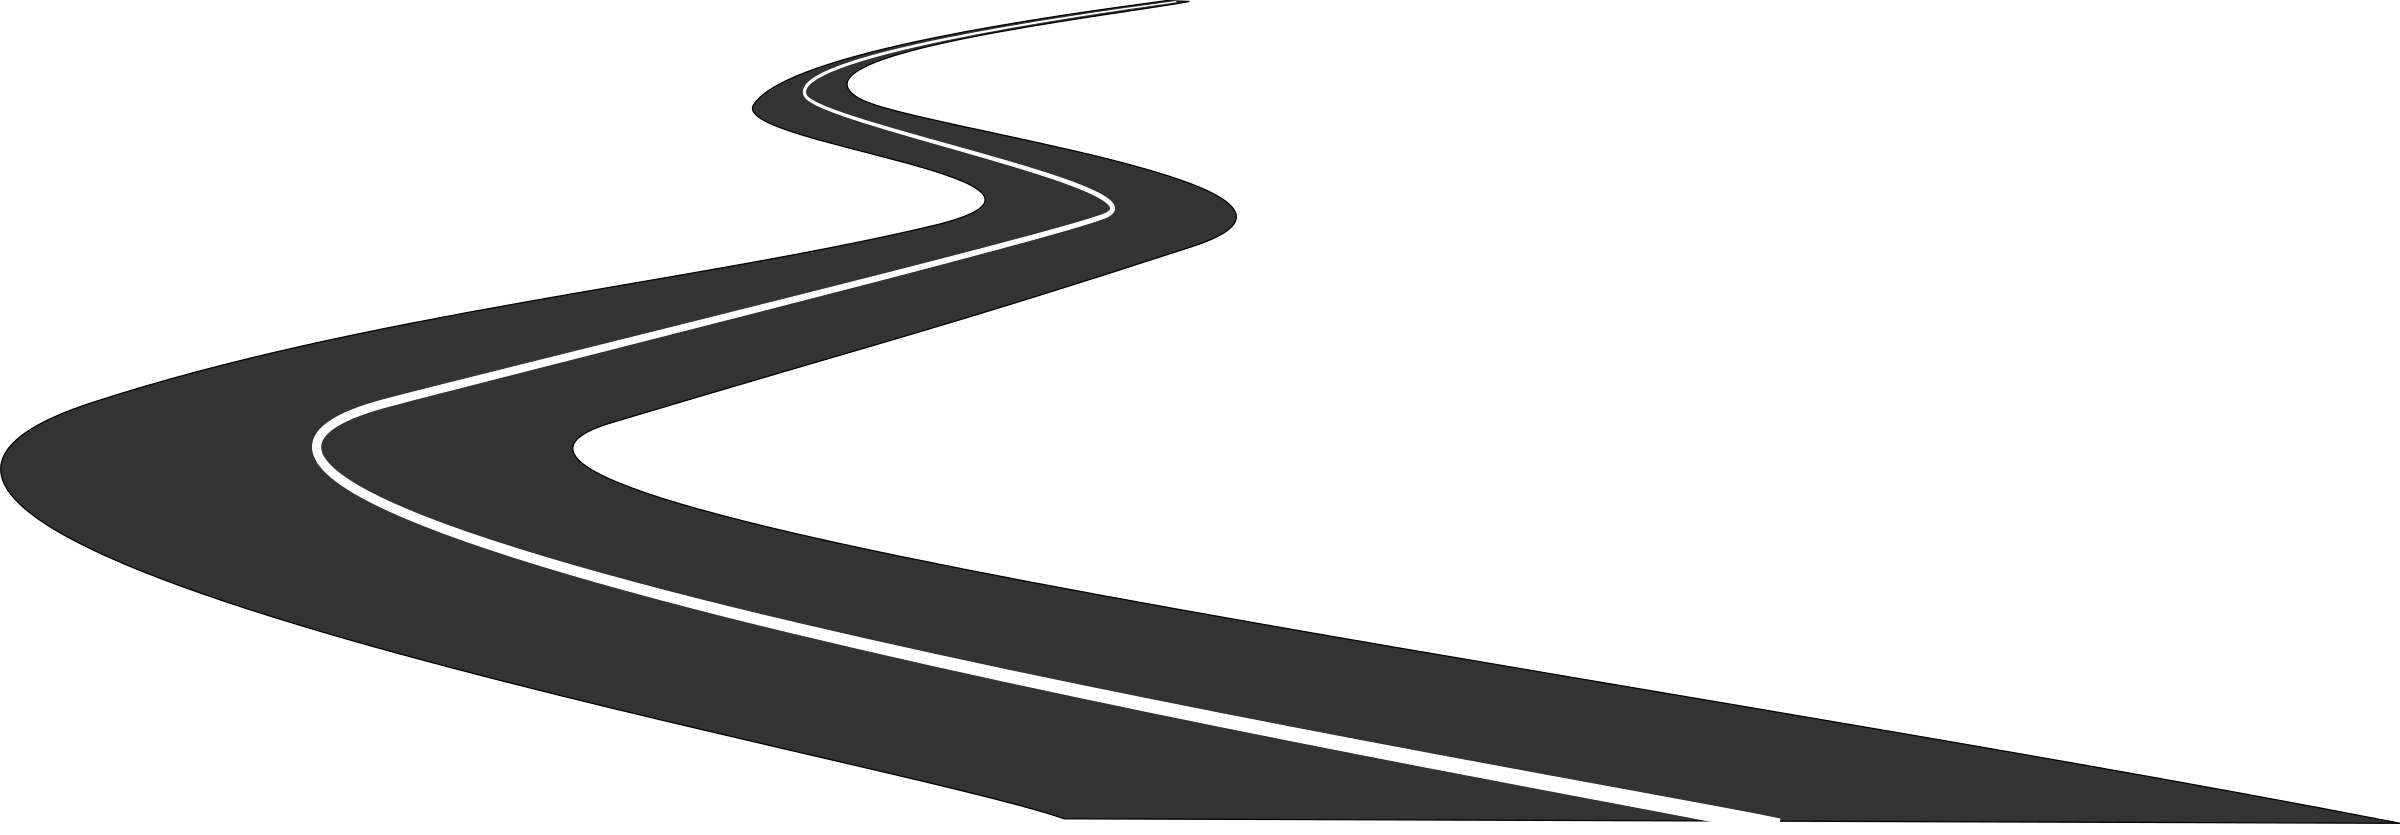 A winding black highway on a 